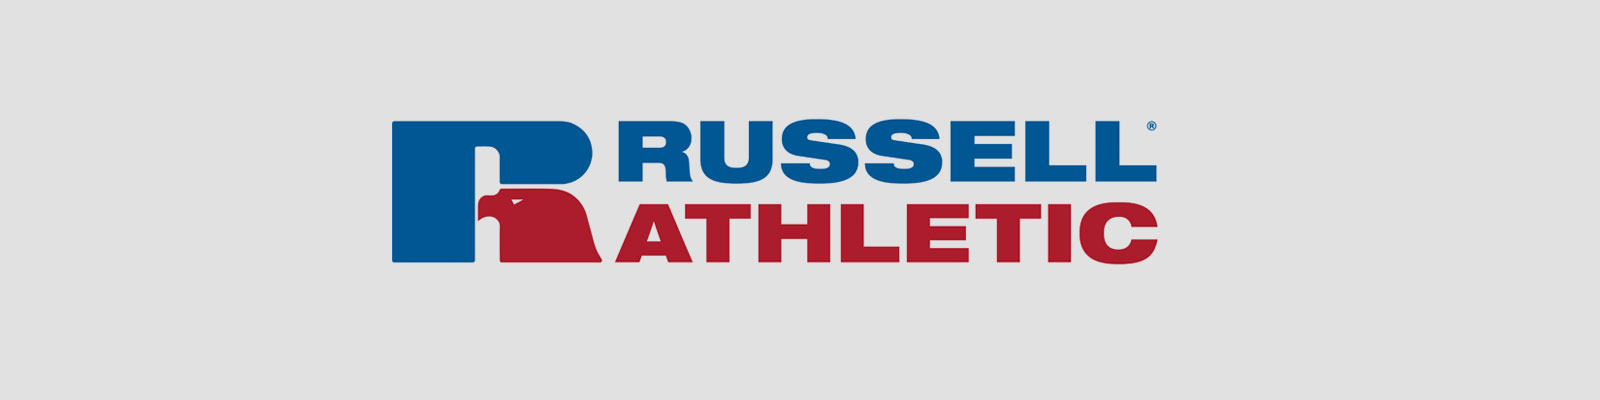 Russell Athletic - Clothing, Sportswear, Athletic Wear | Tillys